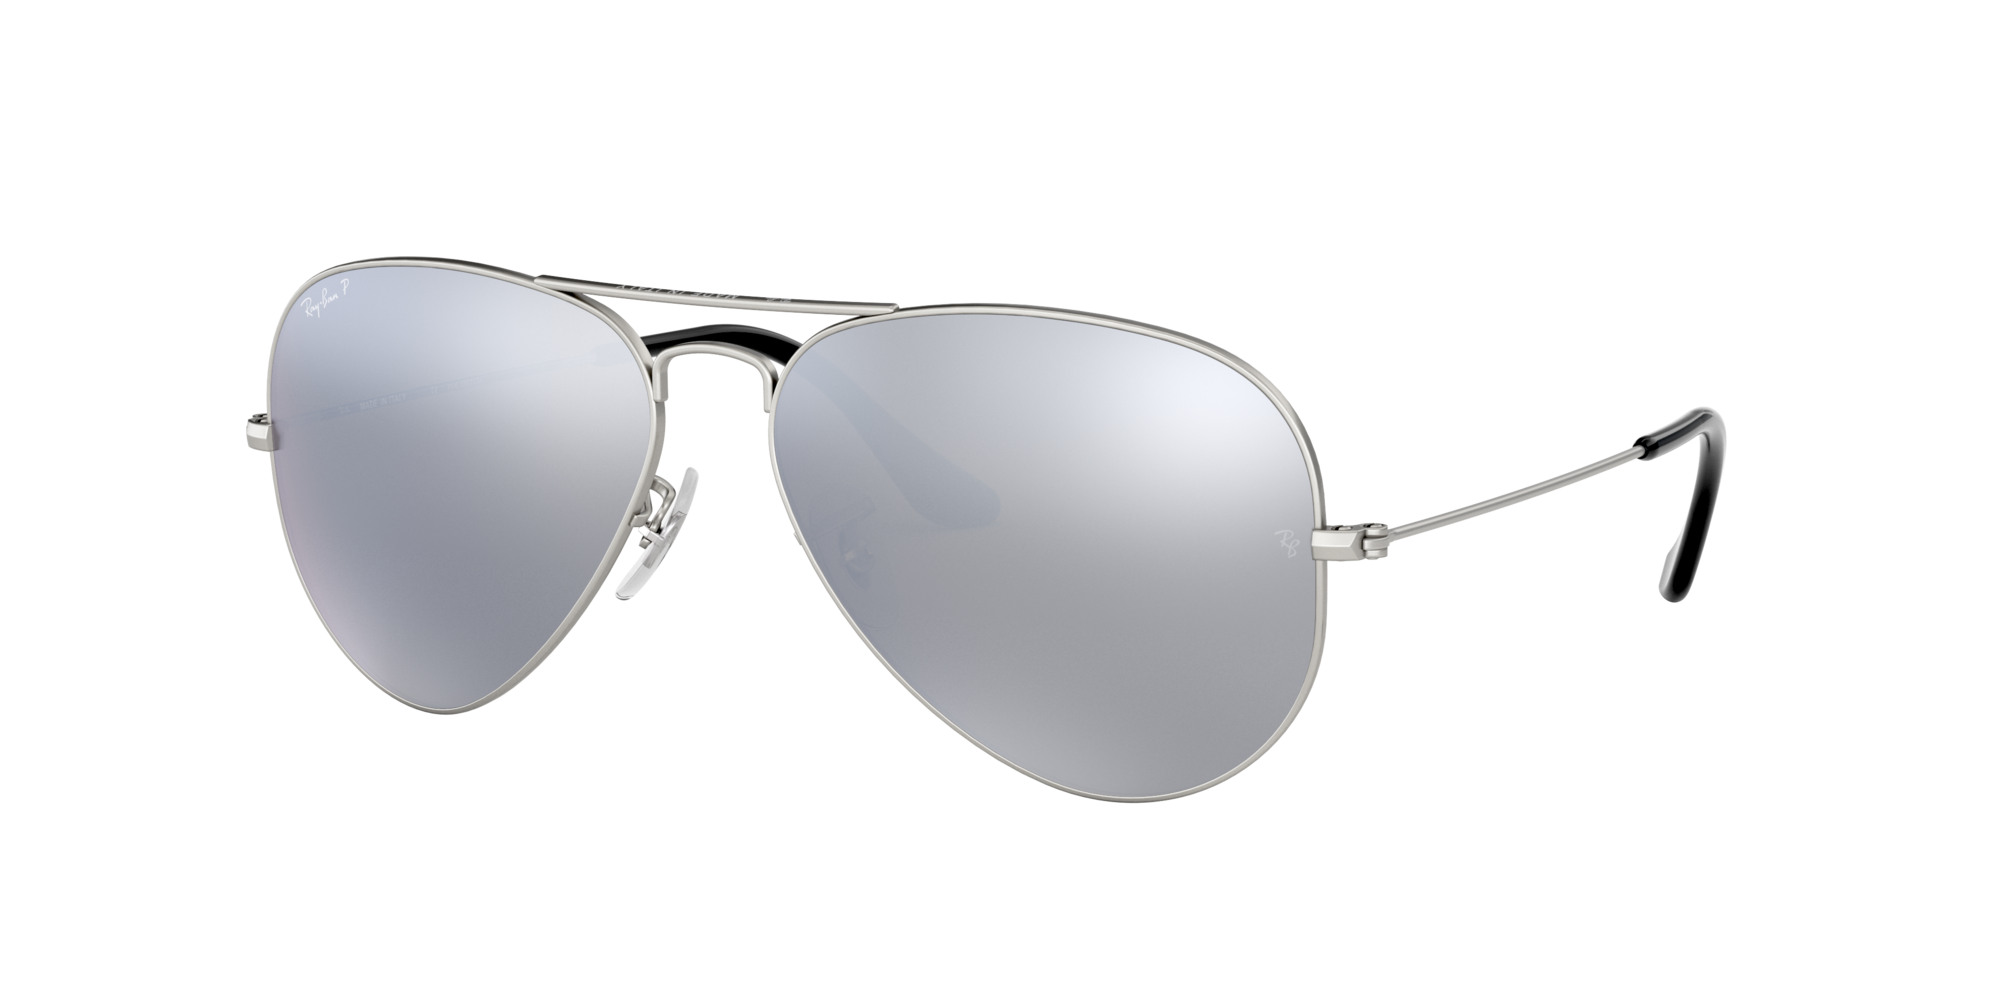 Ray Ban Rb3025 58 Aviator Large Metal Sunglasses Lenscrafters